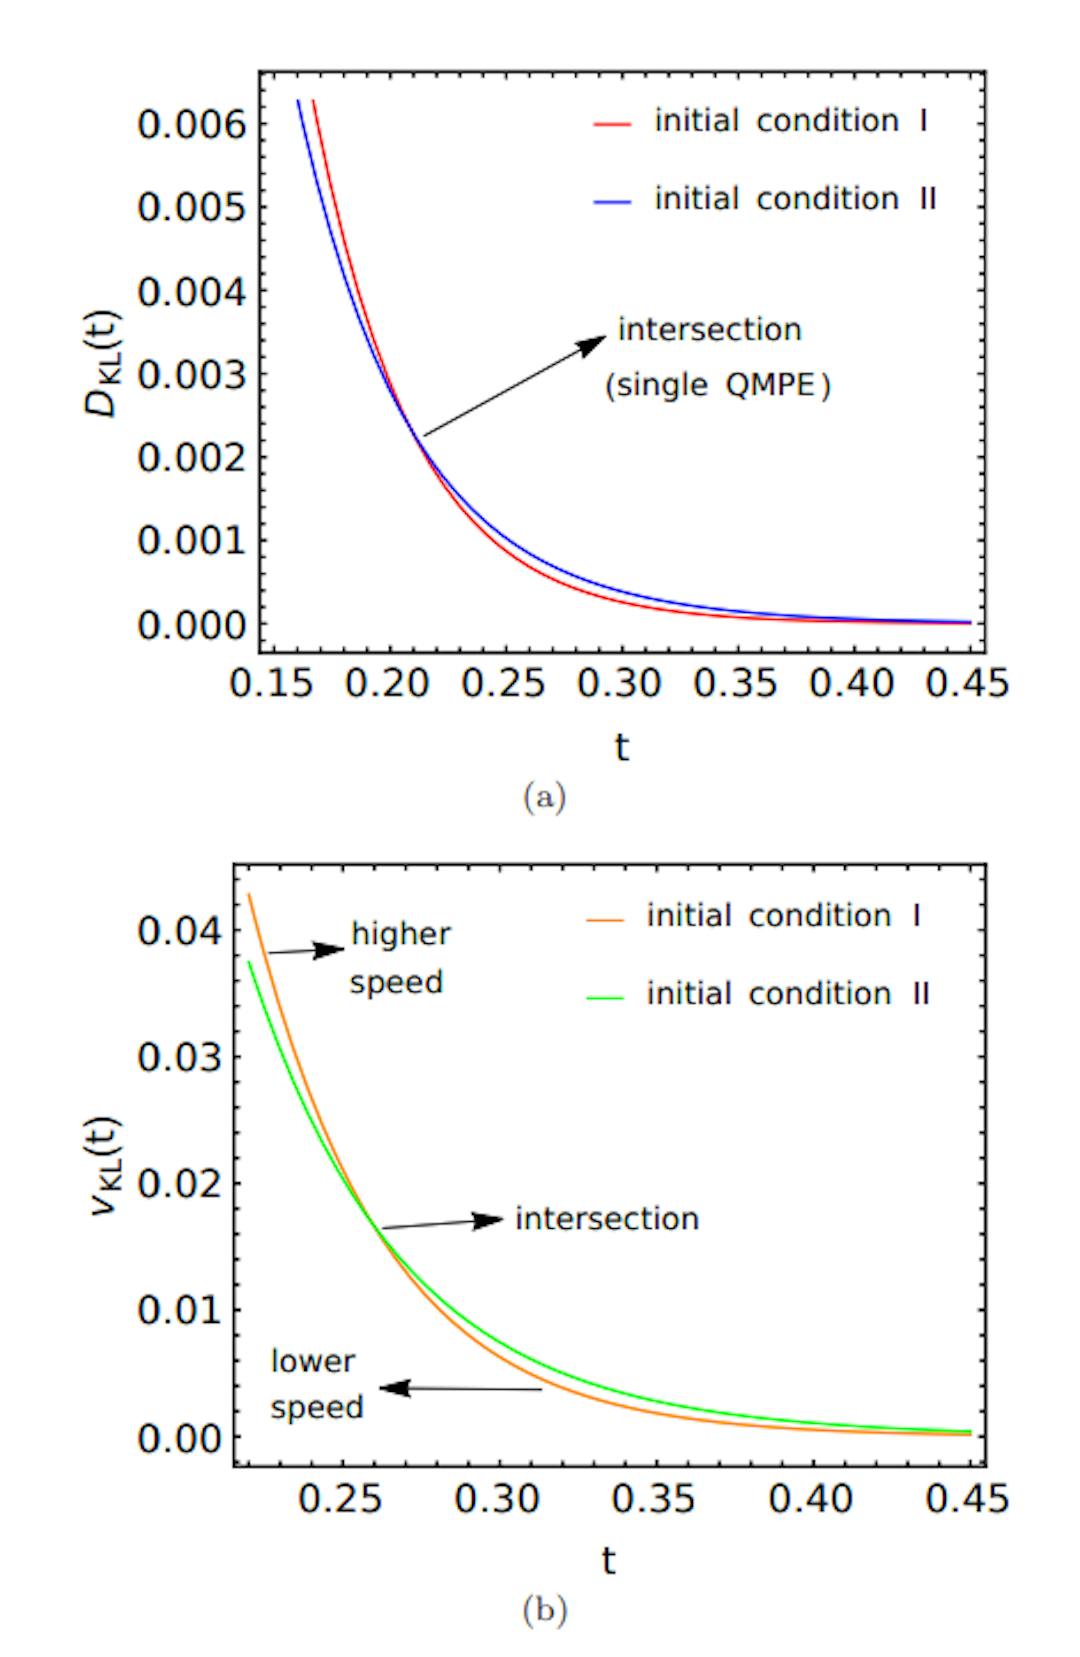 FIG. 6. The figure (a) shows QMPE in KL divergence [Eq. (24)] where the initially higher distant copy (here I) reaches to steady state faster than the initially lower distance copy (here II). The figure (b) demonstrates the relaxation speed [Eq. (25)] of these two copies. The speed also exhibit QMPE, but the intersection time is different compared to D − KL(t). Parameters used for both figures are ˜d = 4.0, Γ =˜ p (568 + 64√ 2)/2, Γ˜I = 20.0, Γ˜II = 4.5, dI = 10.0, ˜dII = 2.0.